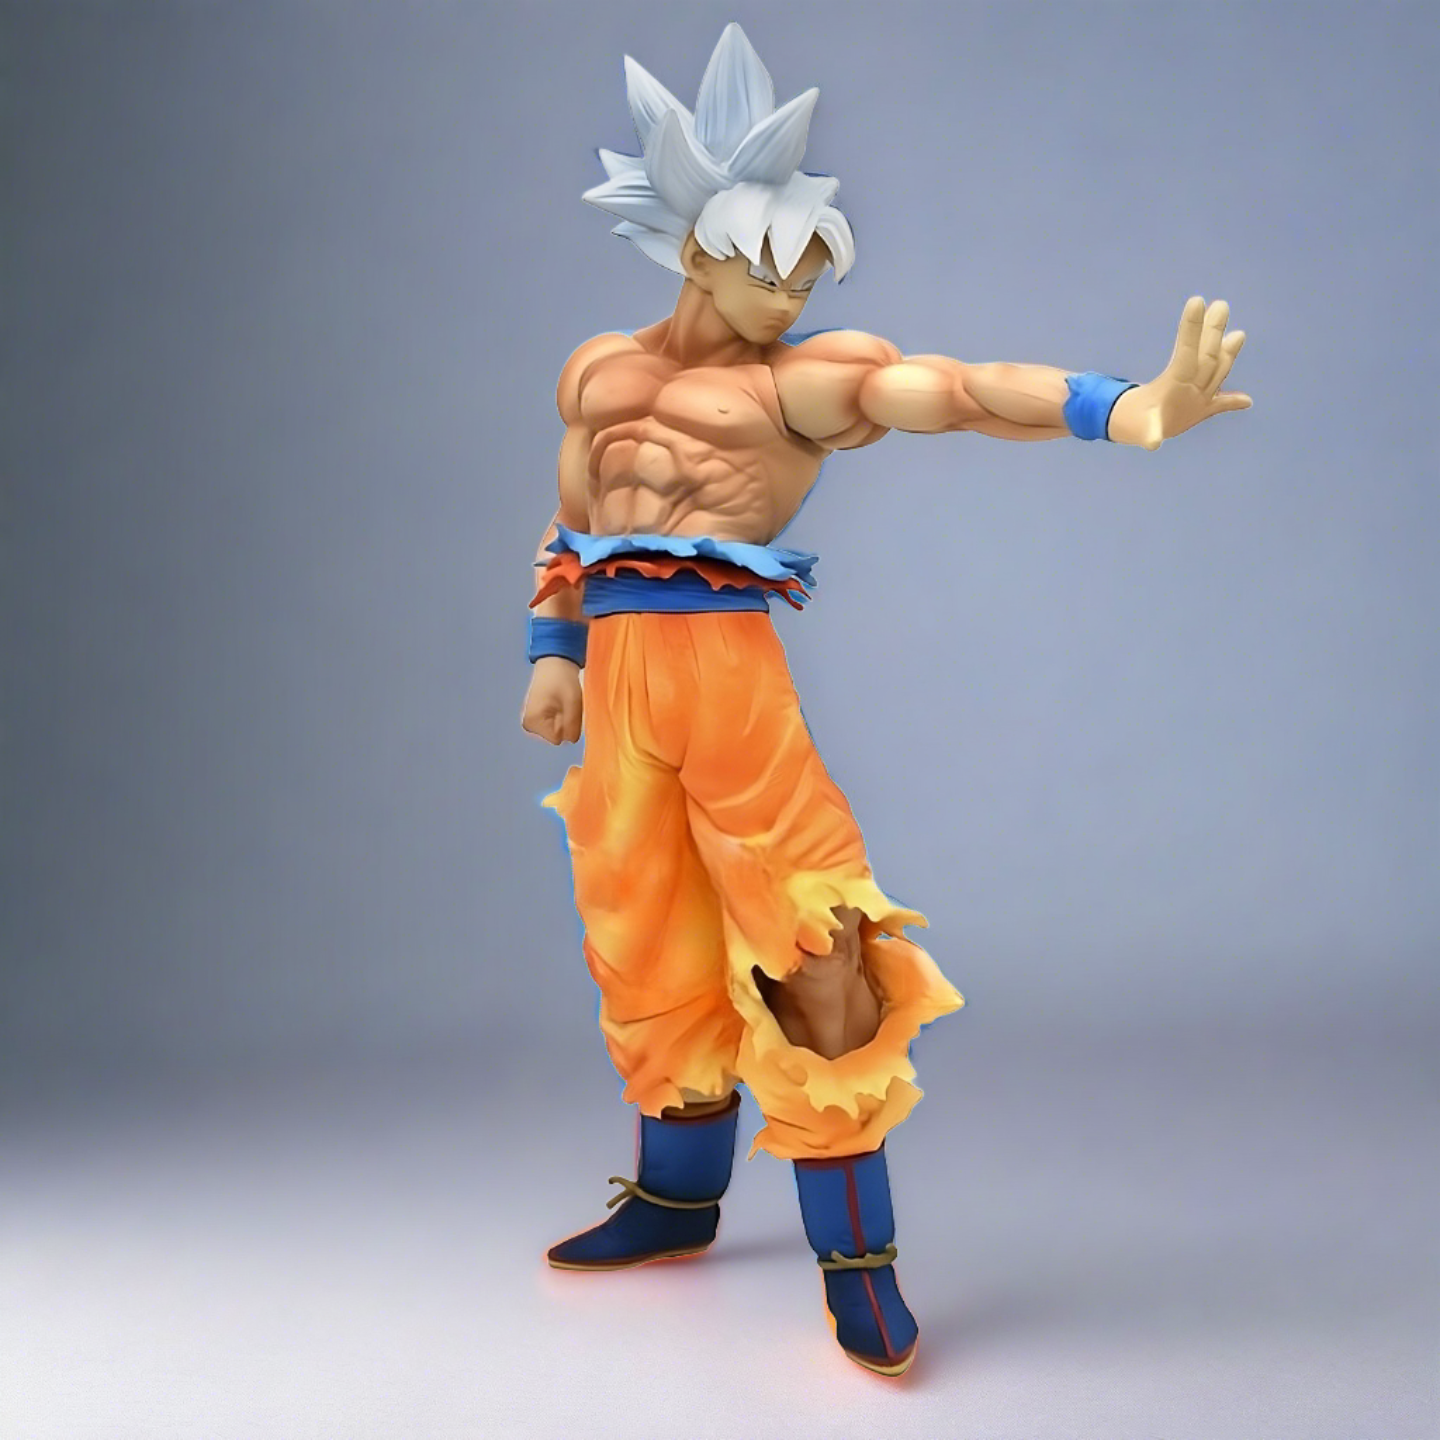 Dragon Ball collectible of Goku in Ultra Instinct form, side stance with a focused expression, and detailed muscle structure, set against a white background.